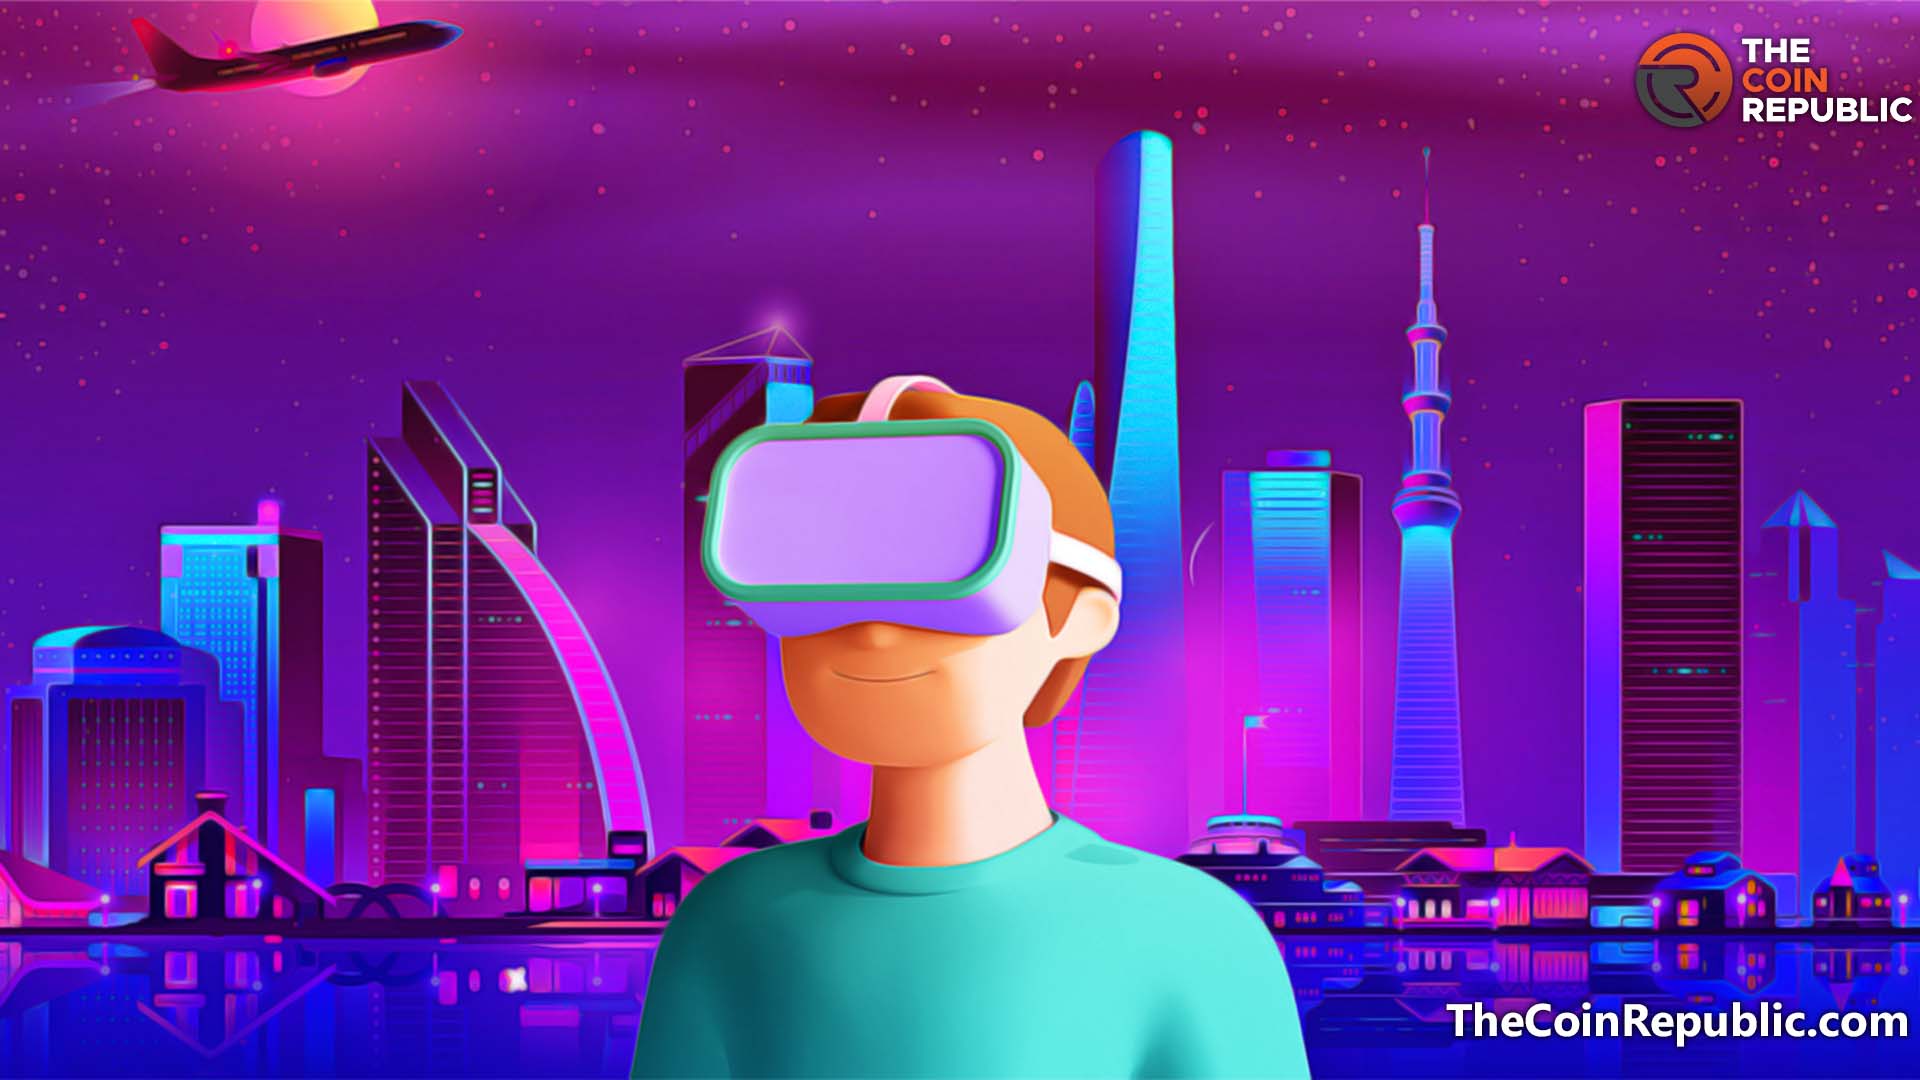 Beta Phase of Metaverse Seoul is Now Open to Citizens